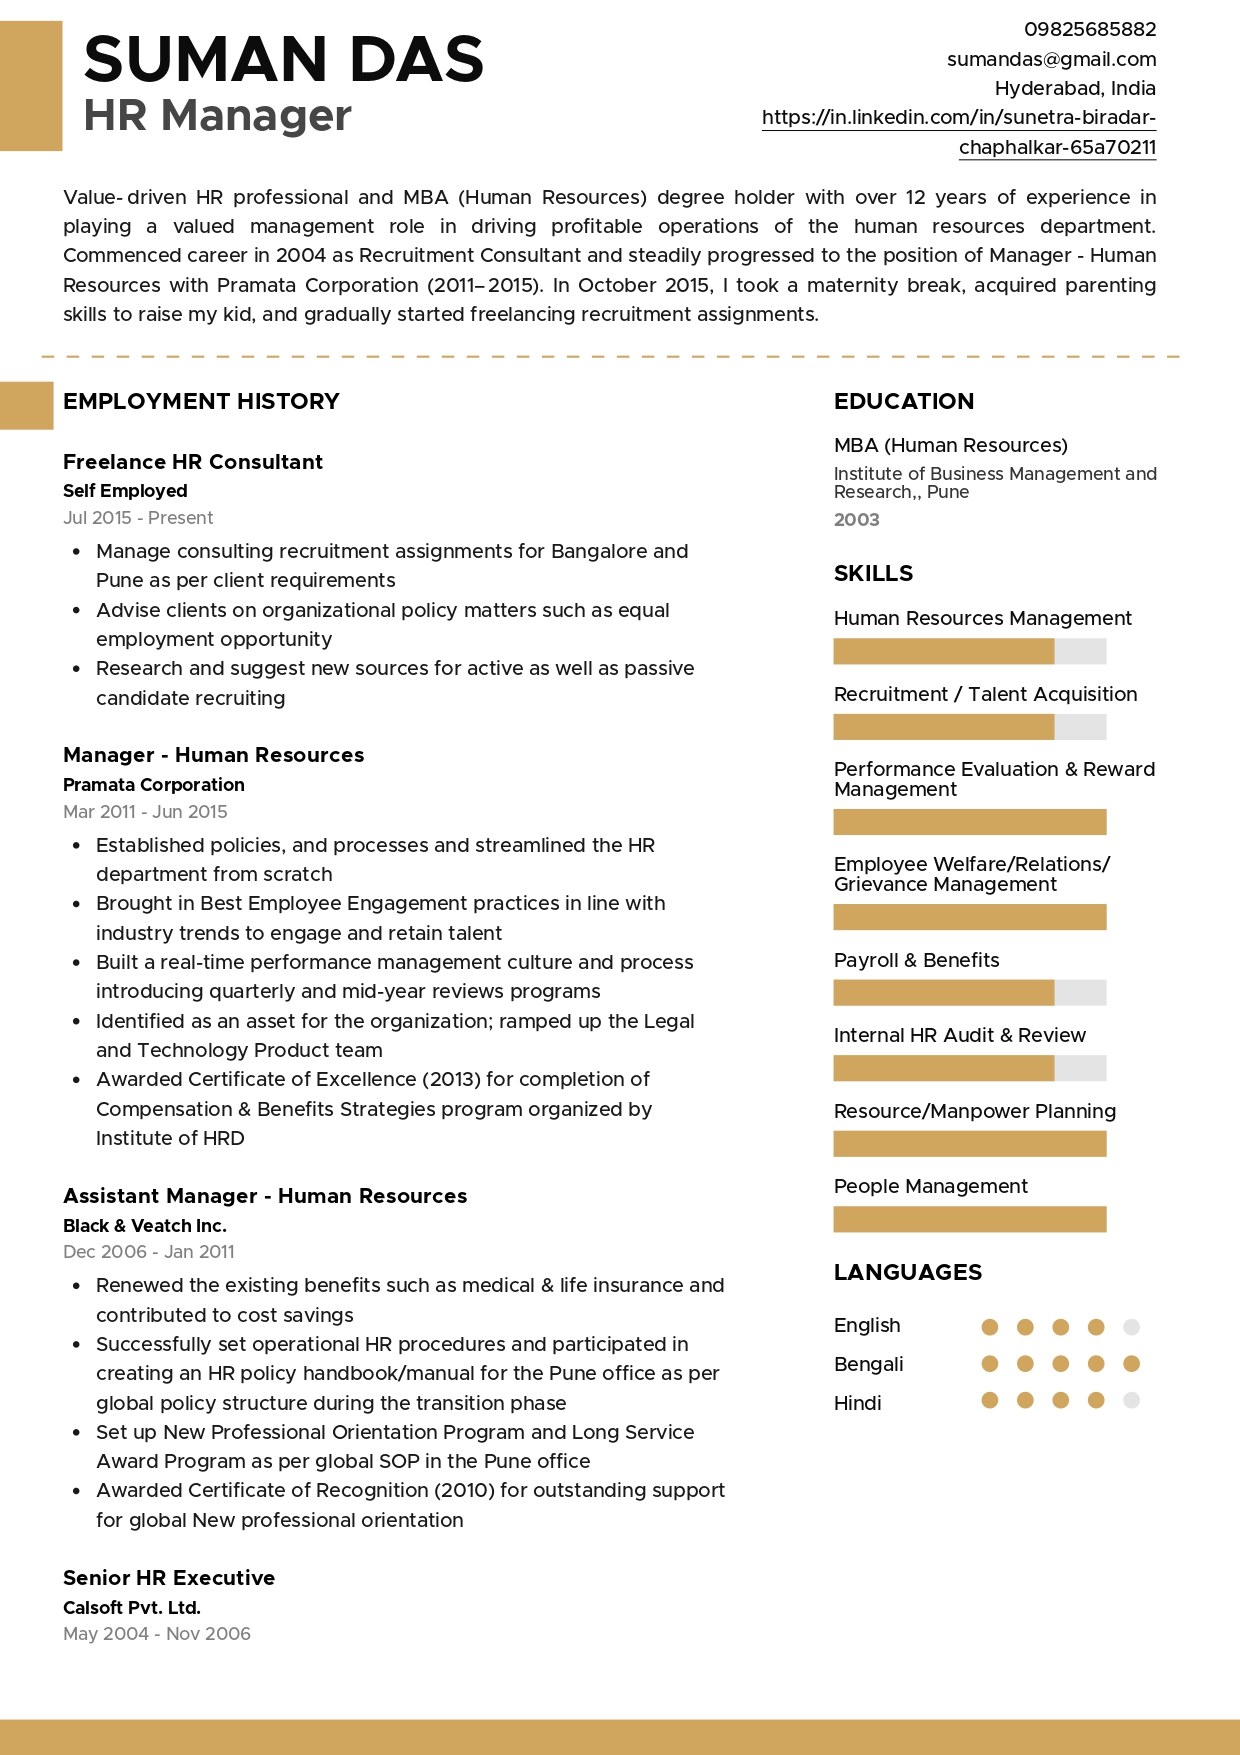 Sample Resume of HR Manager with Career Break | Free Resume Templates & Samples on Resumod.co